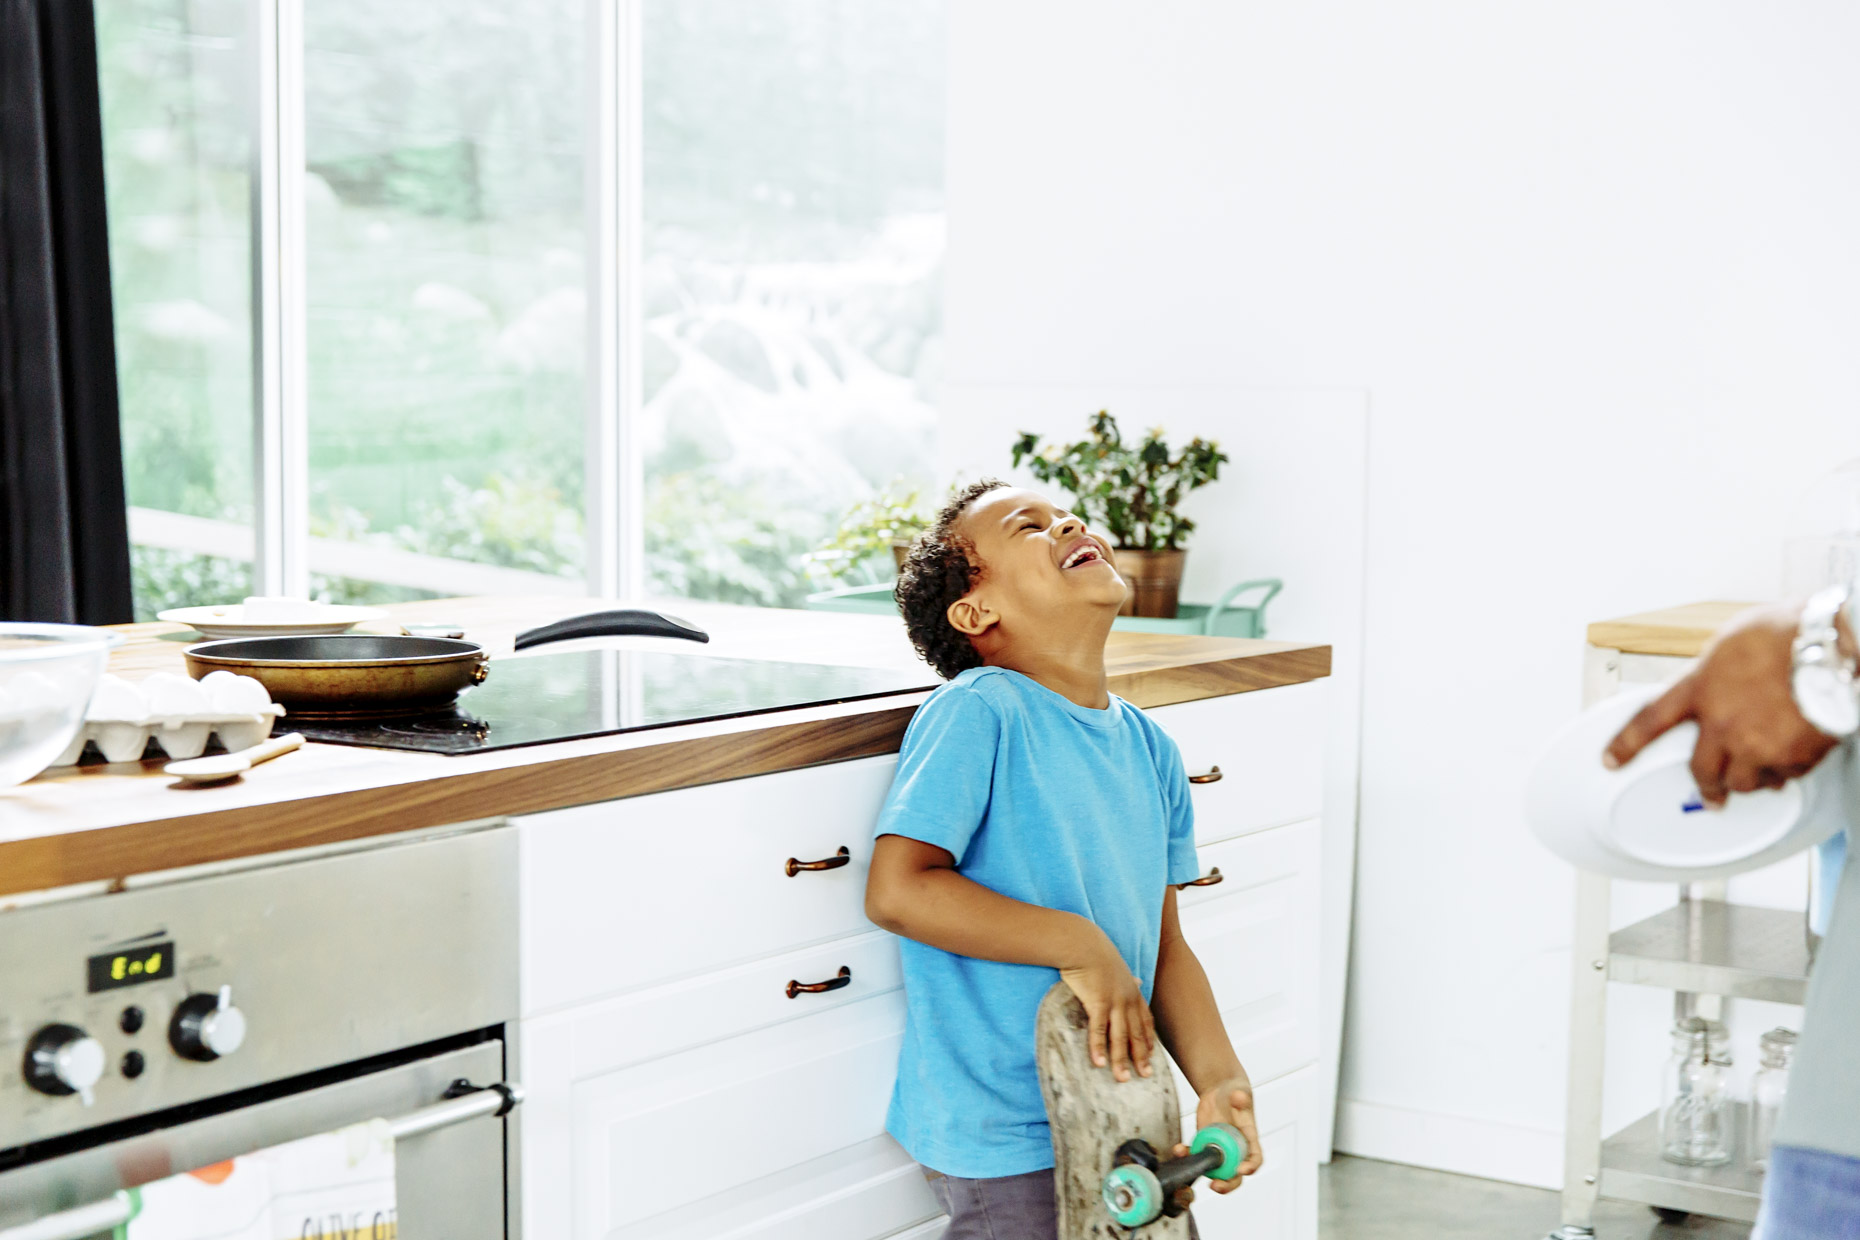 Boy holding skateboard in kitchen with head back laughing